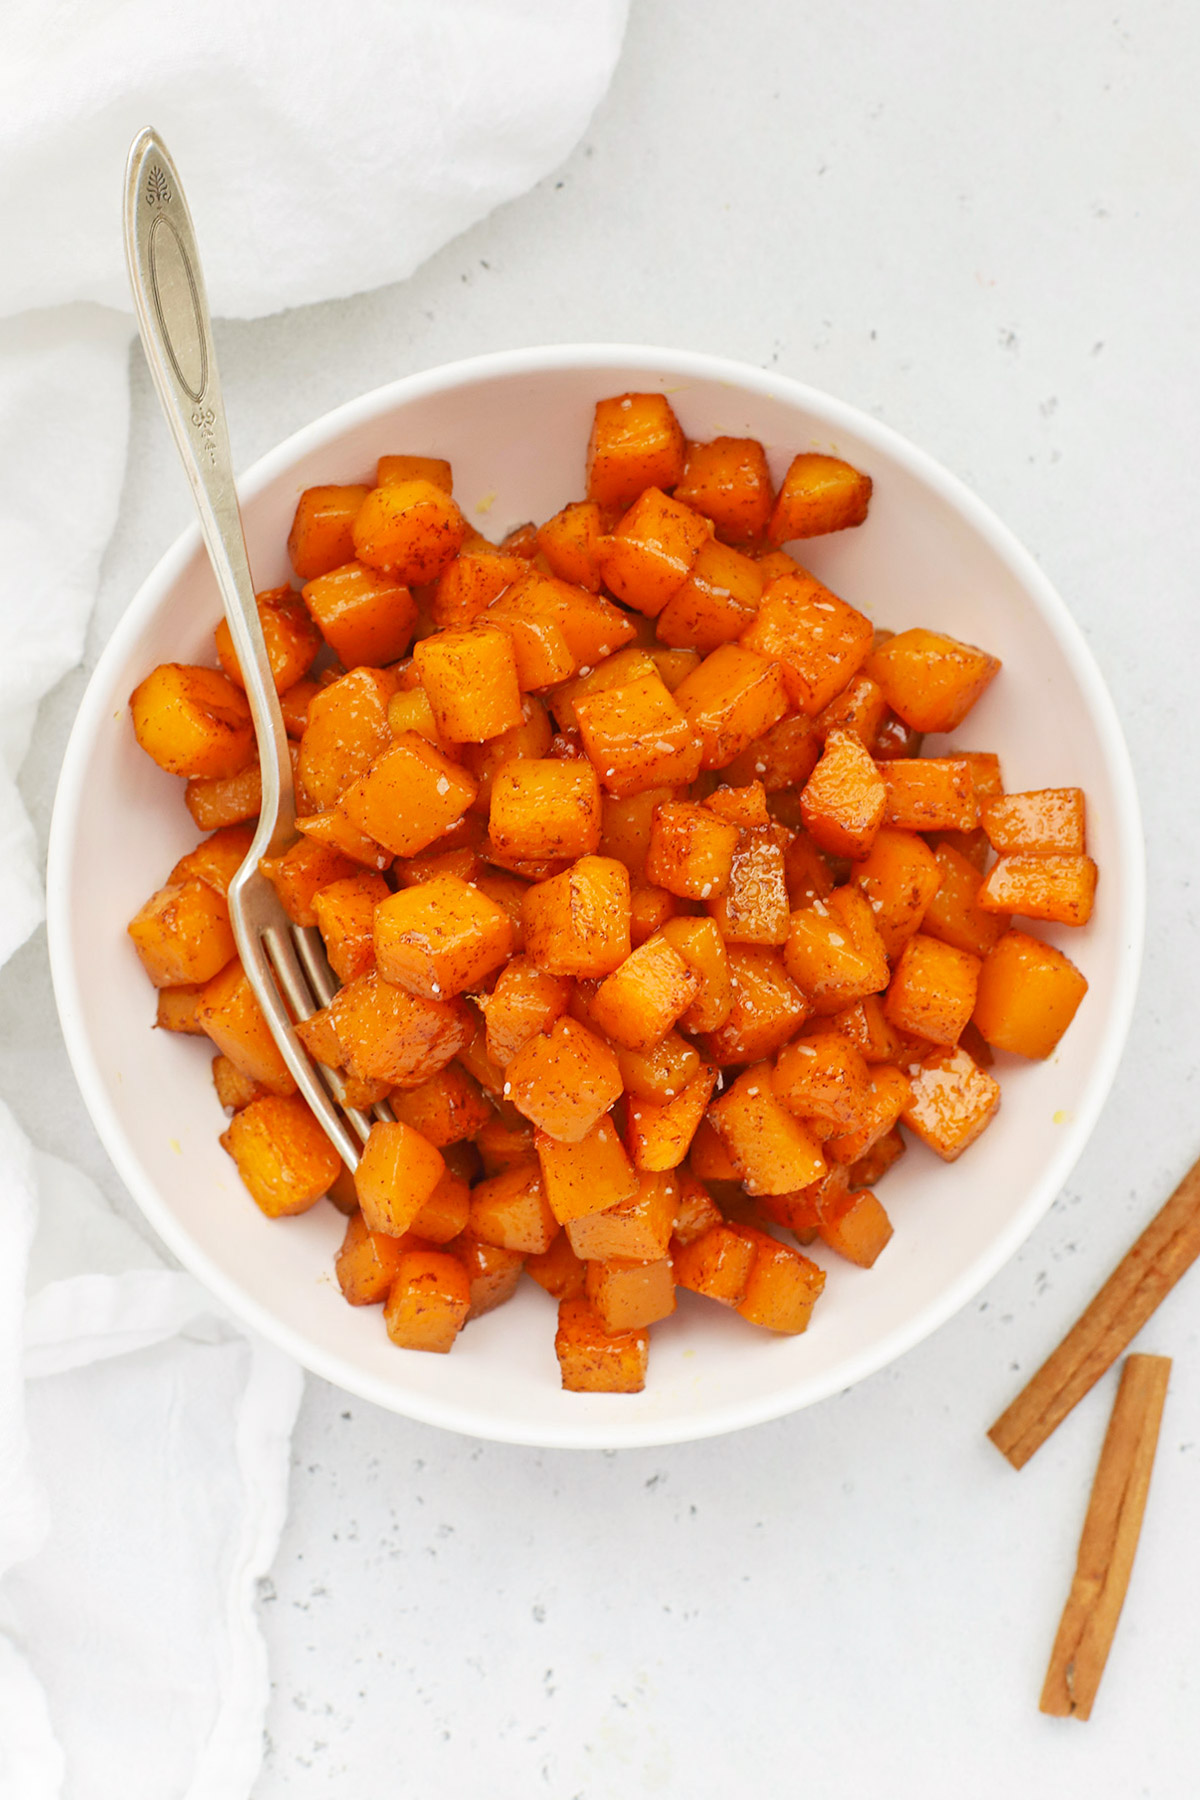 Overhead view of cinnamon roasted butternut squash in a white bowl